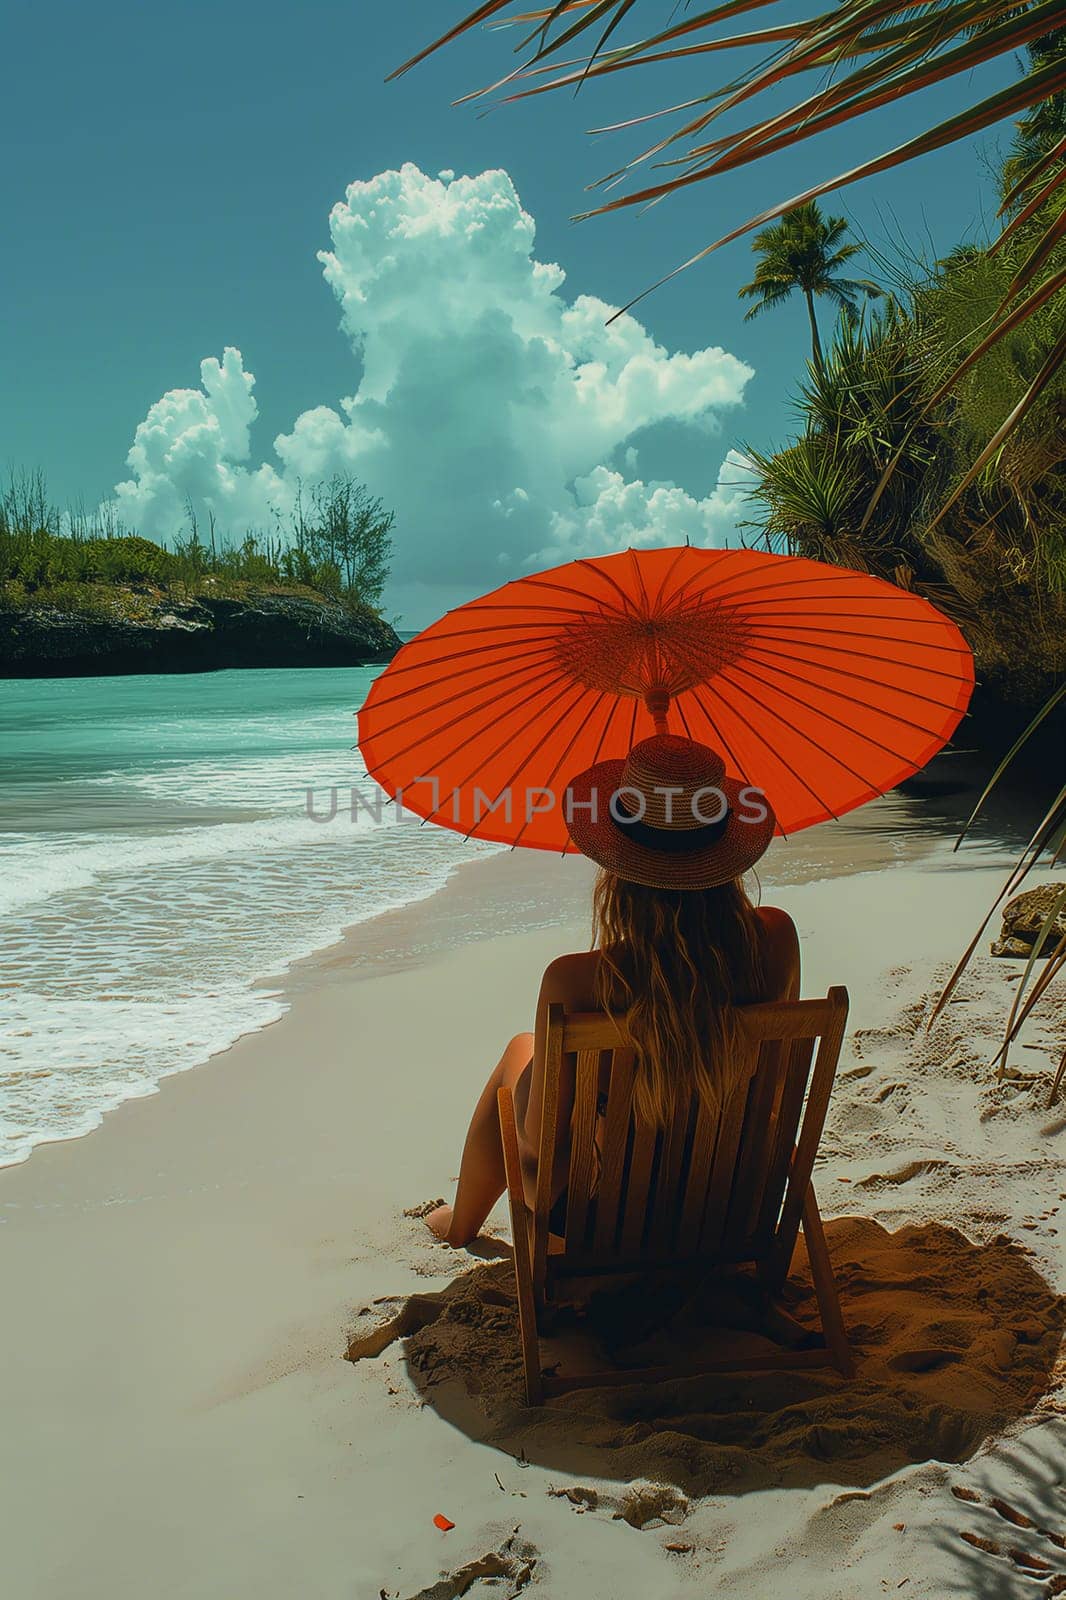 A person sits under a vibrant orange umbrella on a serene beach, gazing at the sky.